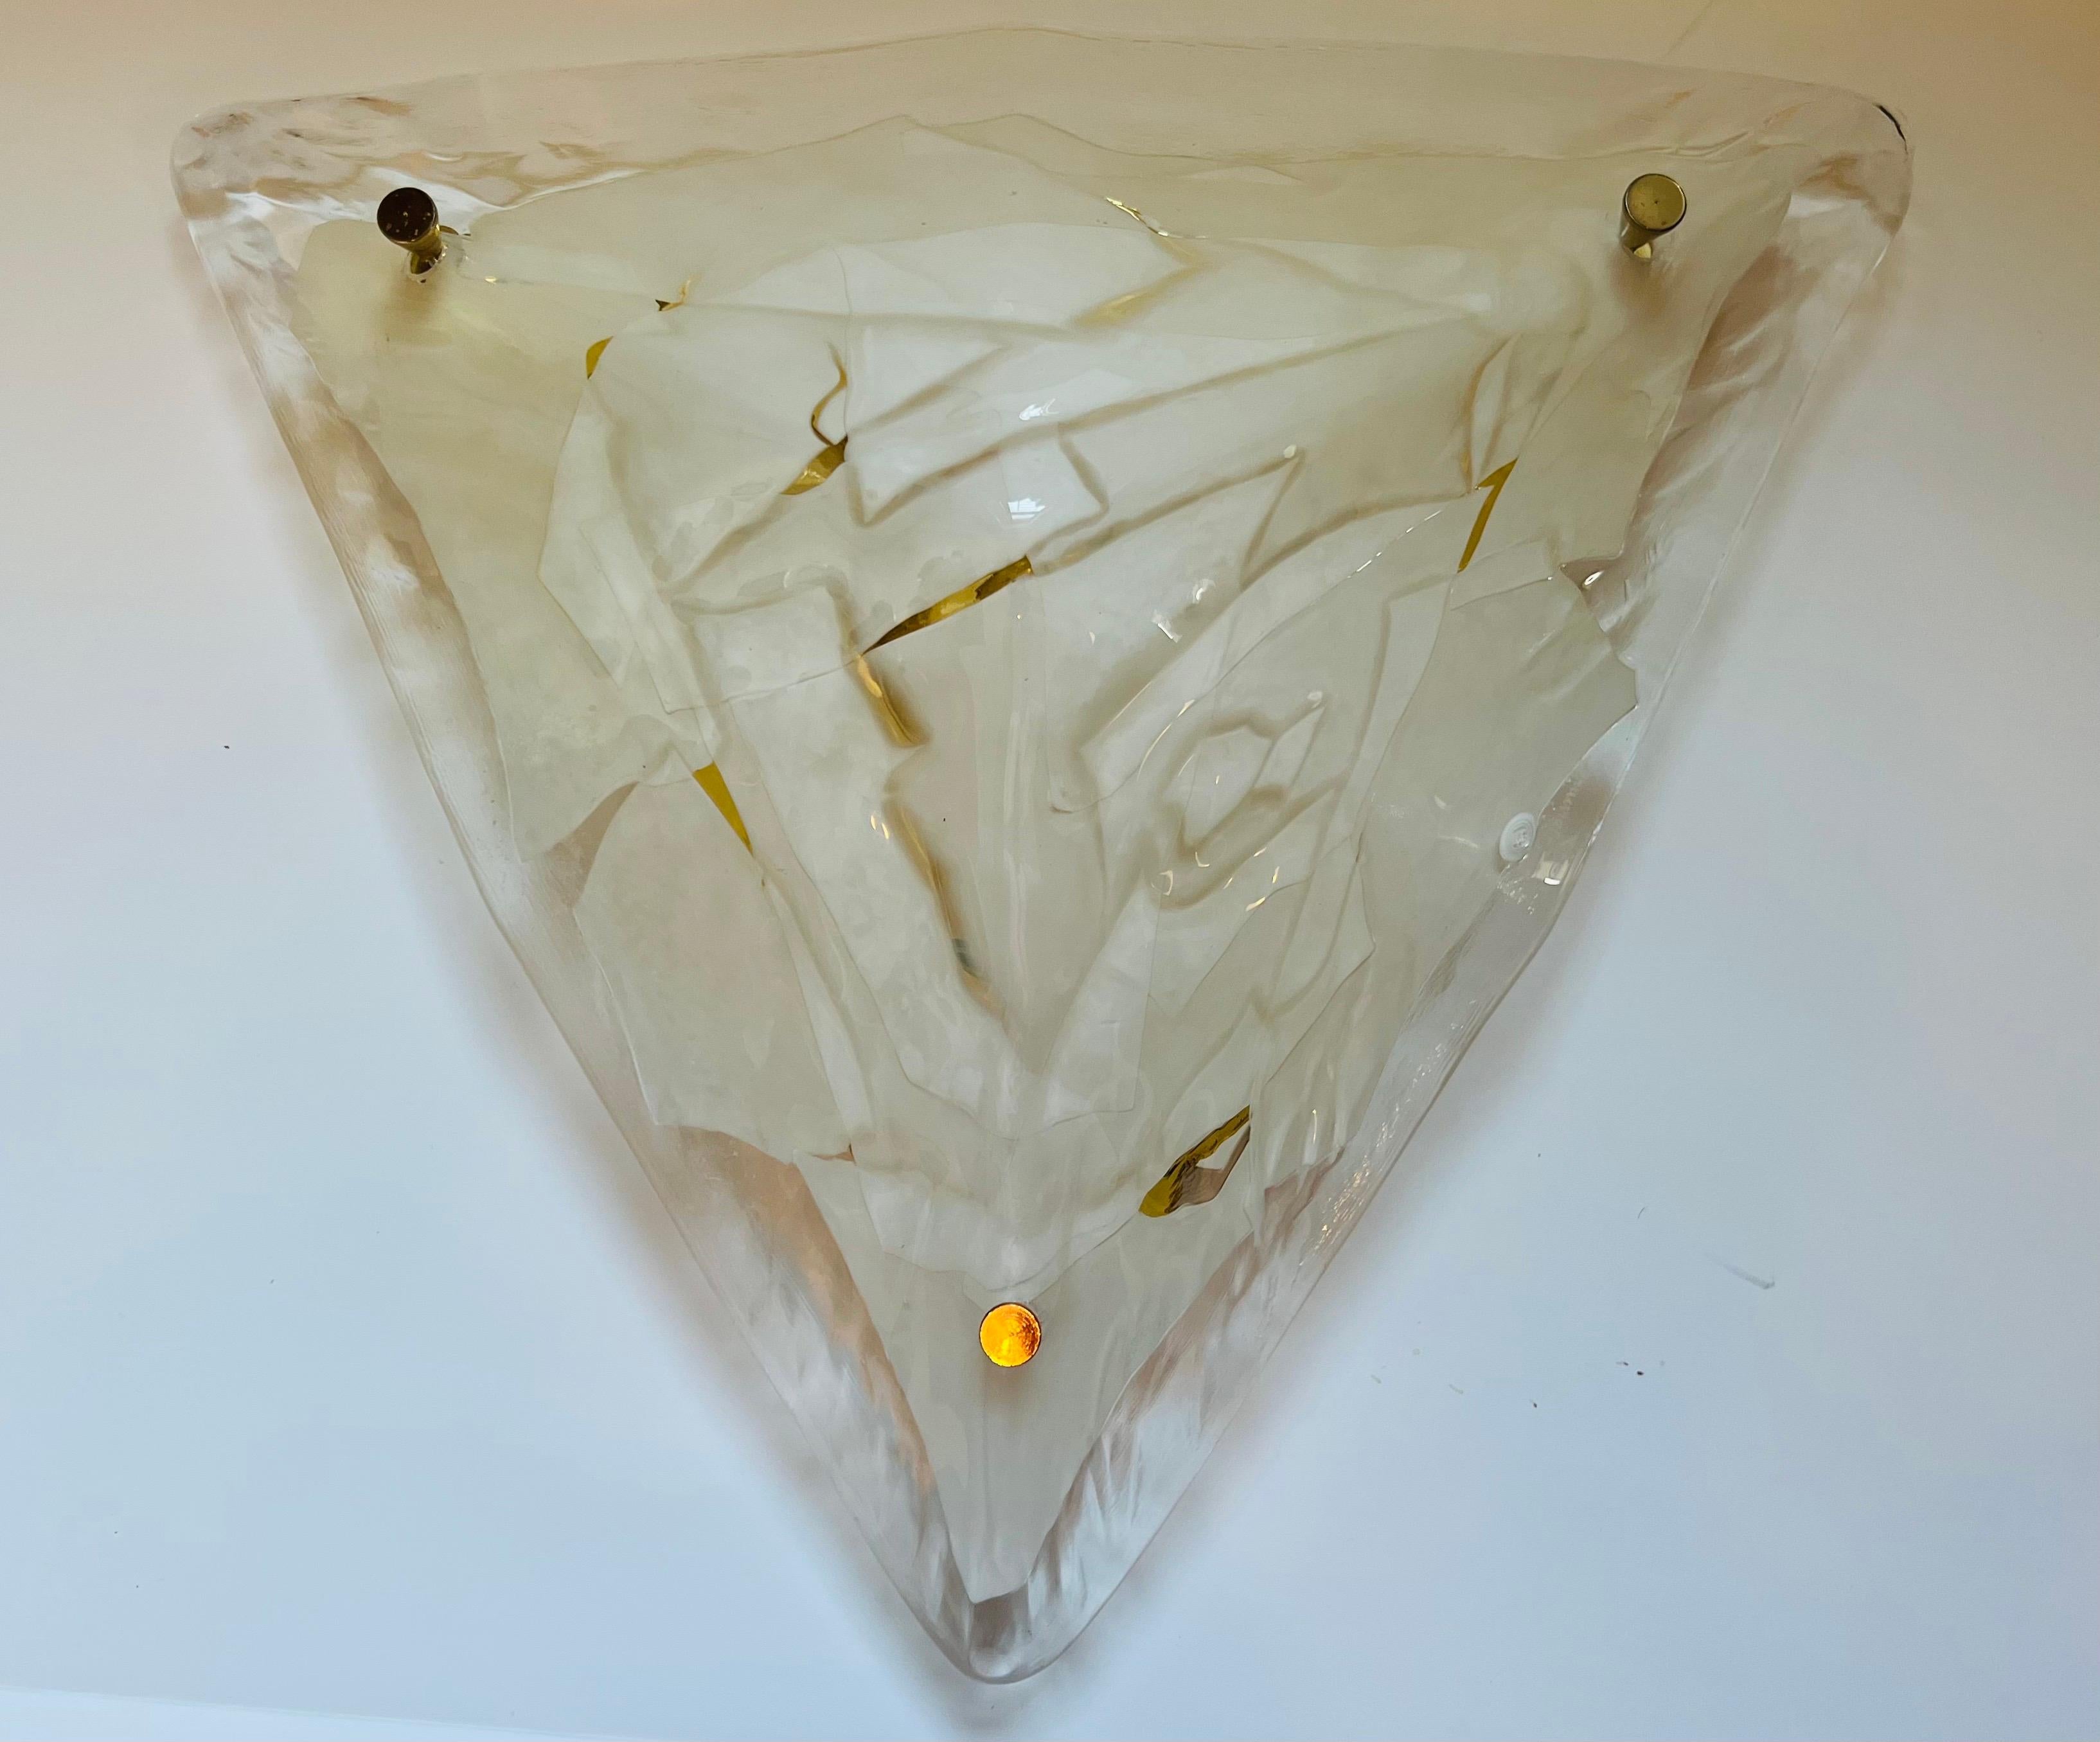 A hand Blown Murano Glass Triangular pyramid clear and white with gold fitting. Made by La Murrumbidgee 1980. Golden brass fixture. Rewired I’m. Three candelabra sockets. Signed.